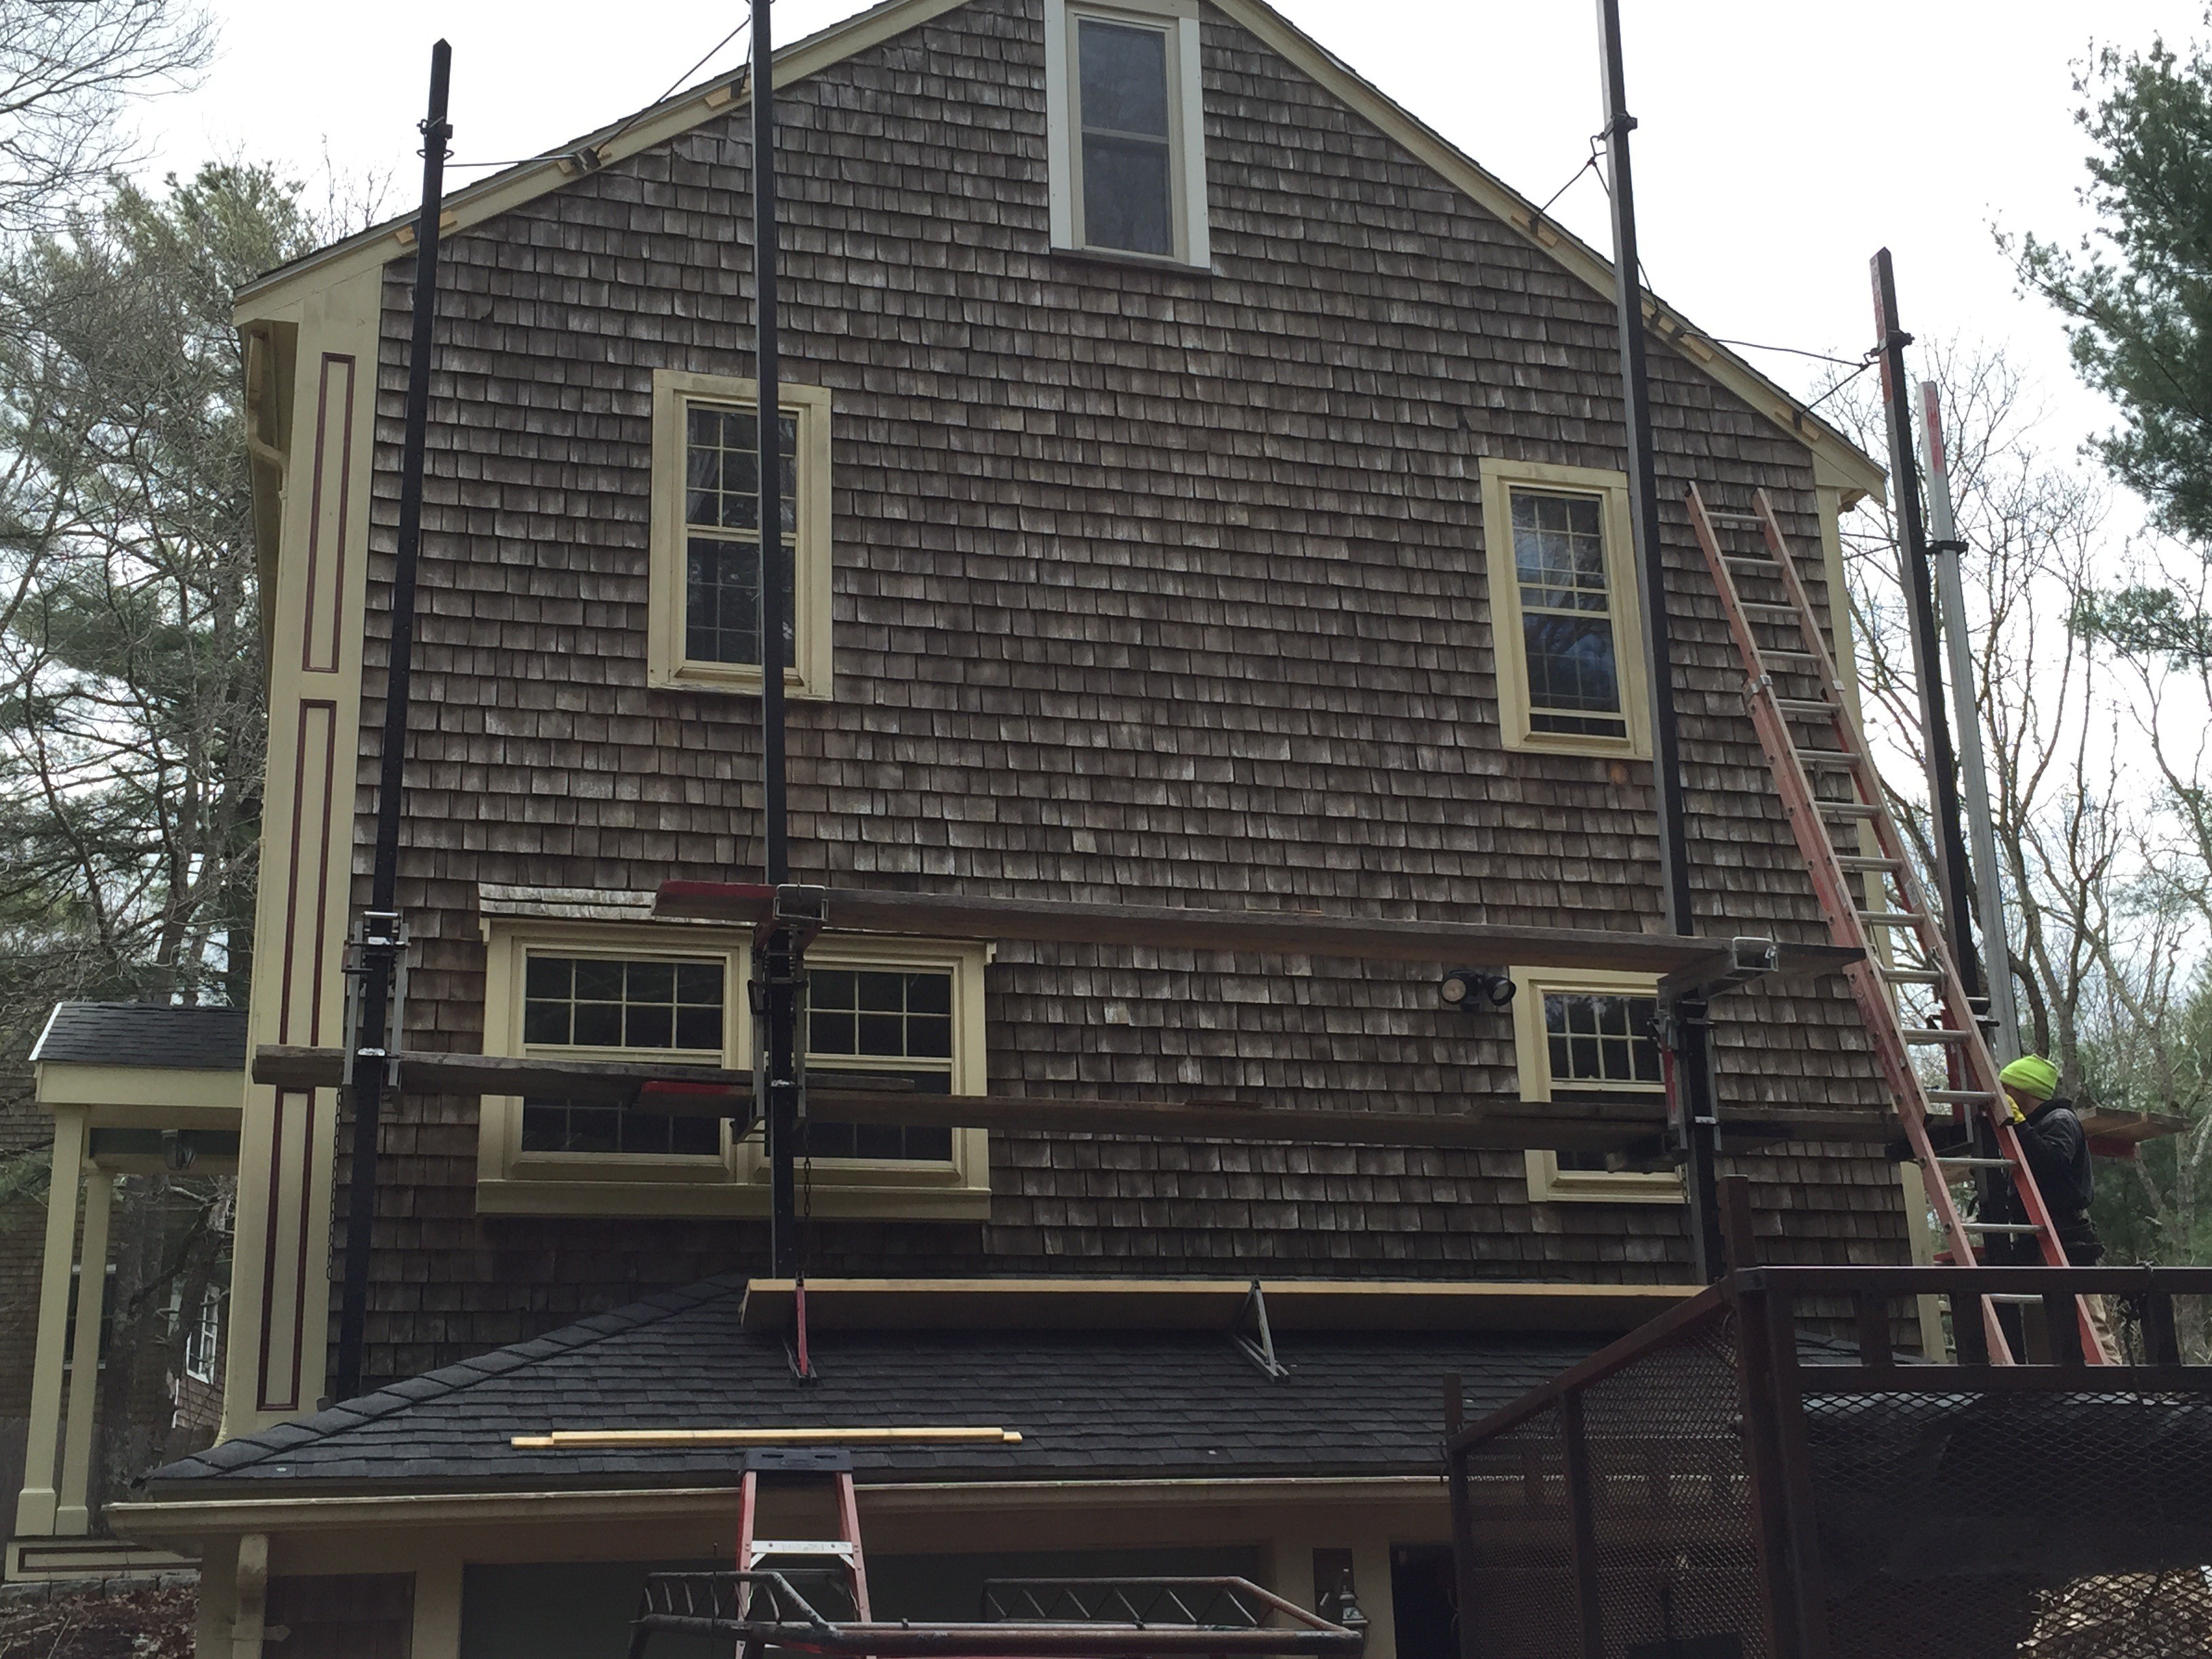 Manomet MA roofing and siding